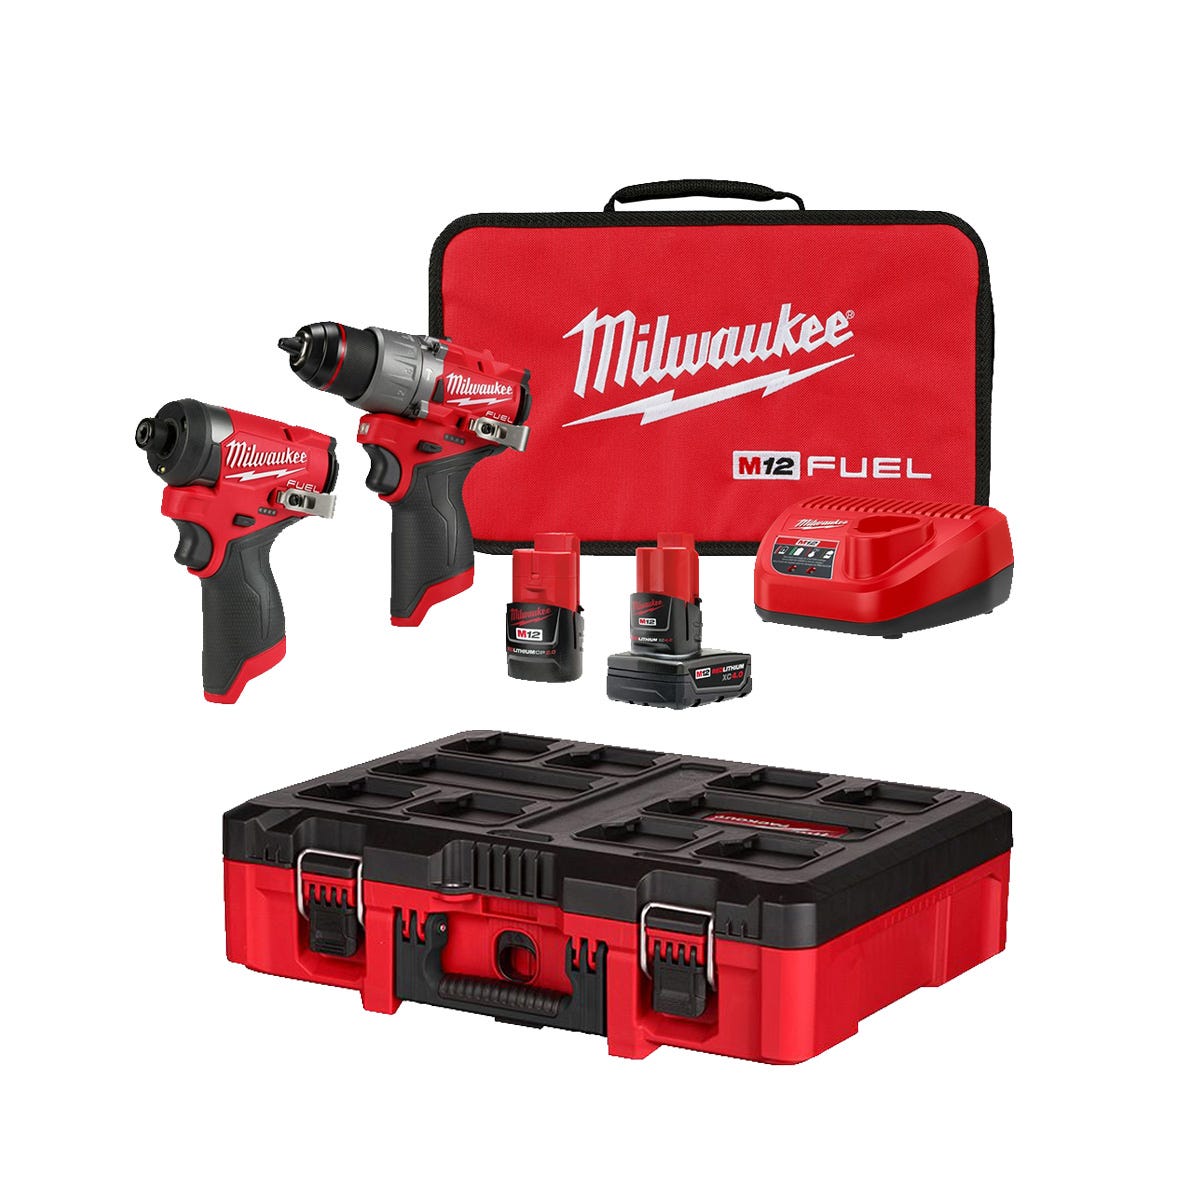 Milwaukee 3497-22 M12 FUEL Gen4 1/2-in. Drill Driver and 1/4-in. Hex Impact  Driver Combo Kit with PACKOUT Tool Case with Customizable Insert